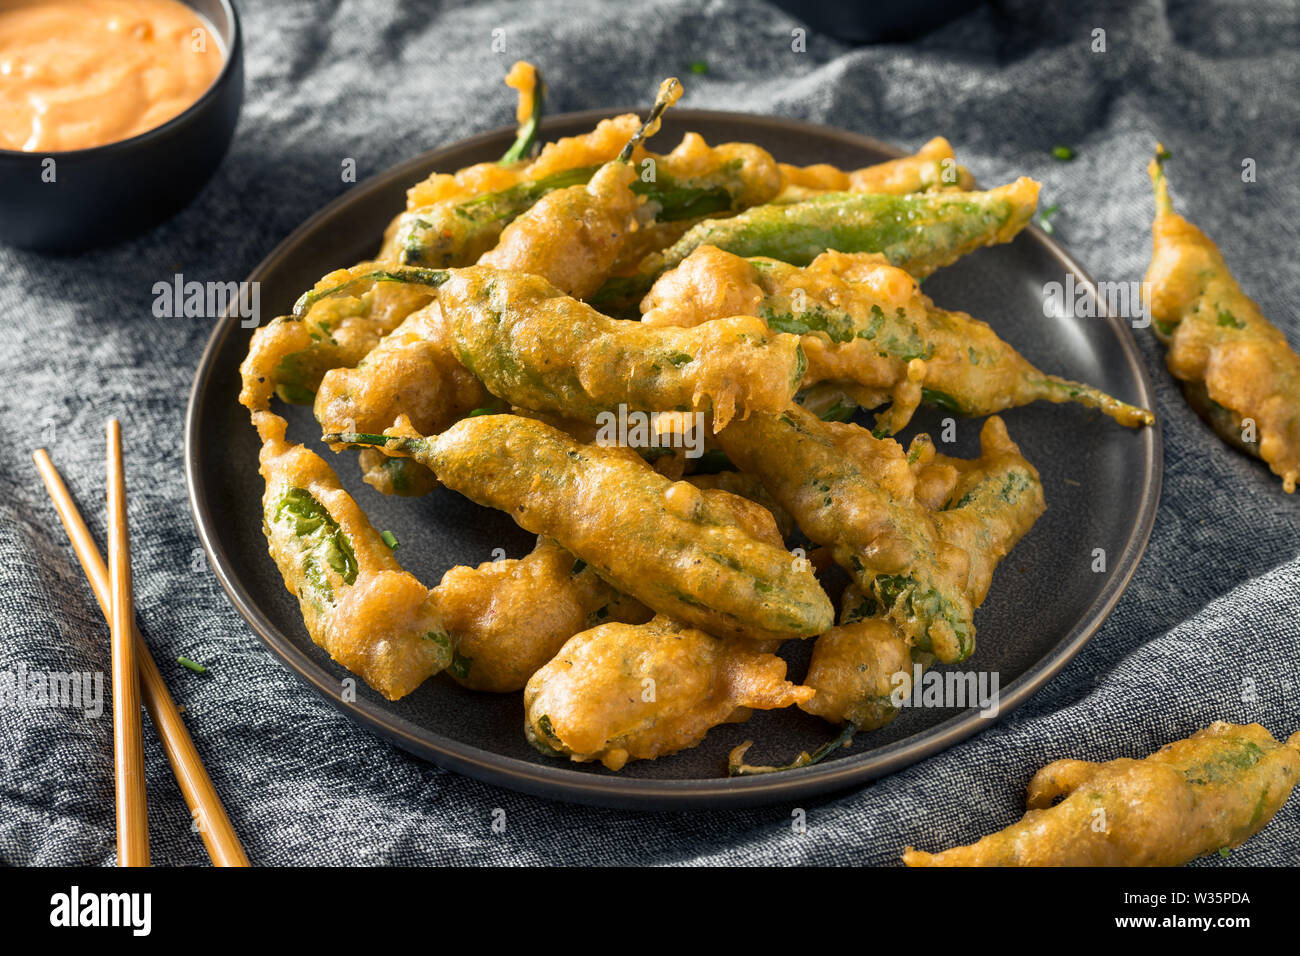 Homemade Deep Fried Shishito Peppers with Sauce Stock Photo